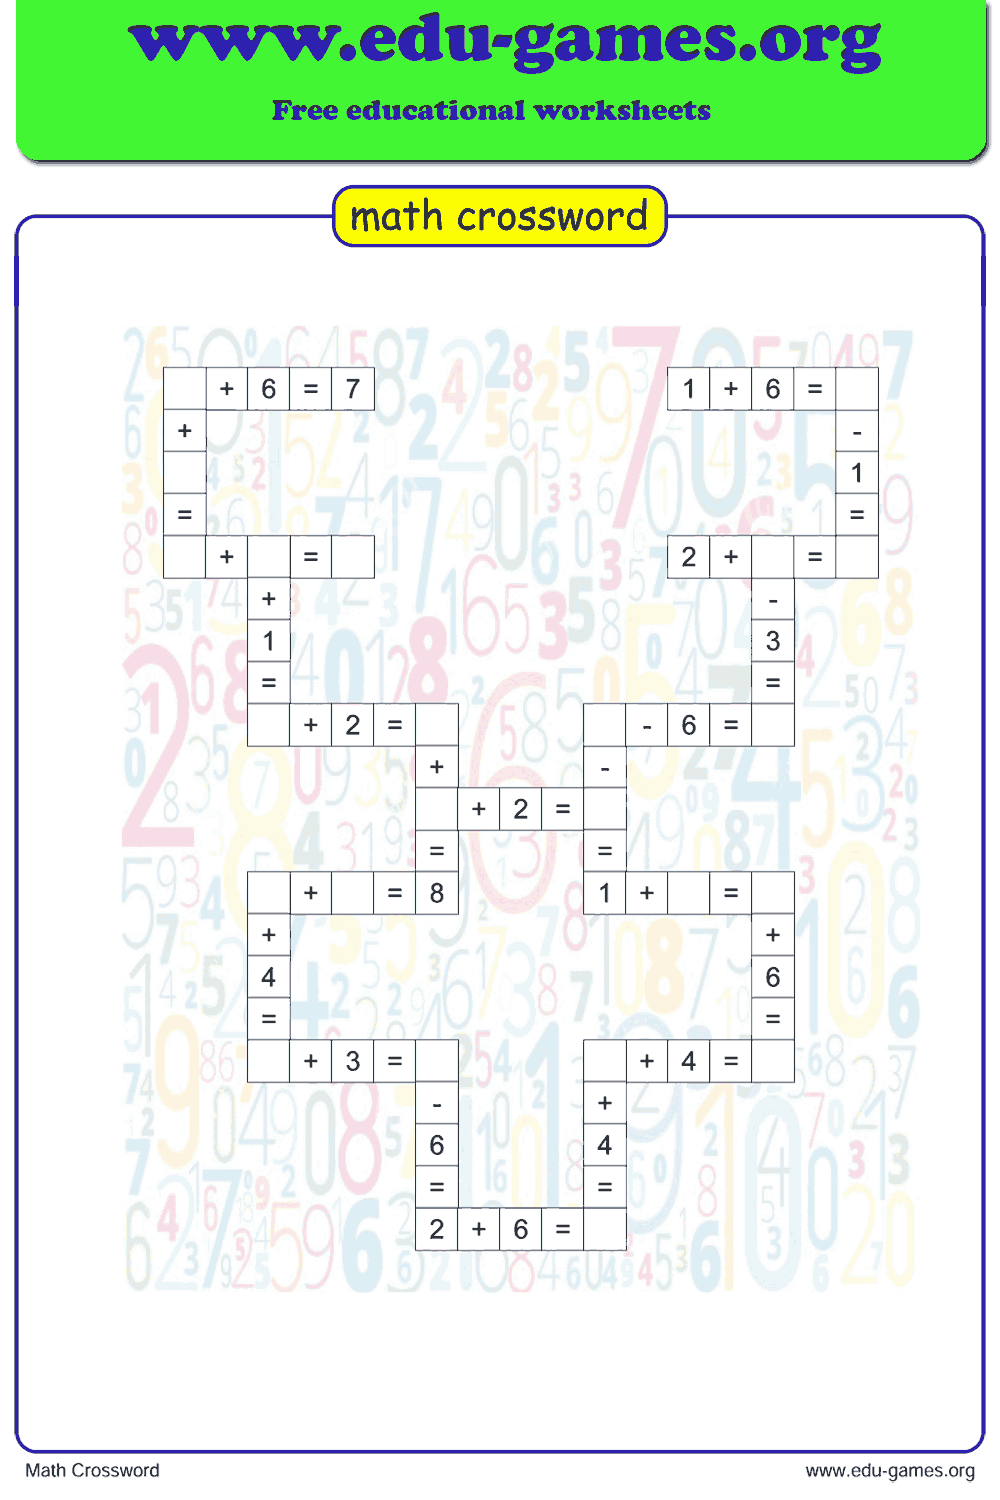 Arithmetic Crossword Puzzle Maker for Grade 1, 2 and 3 - Free Printable